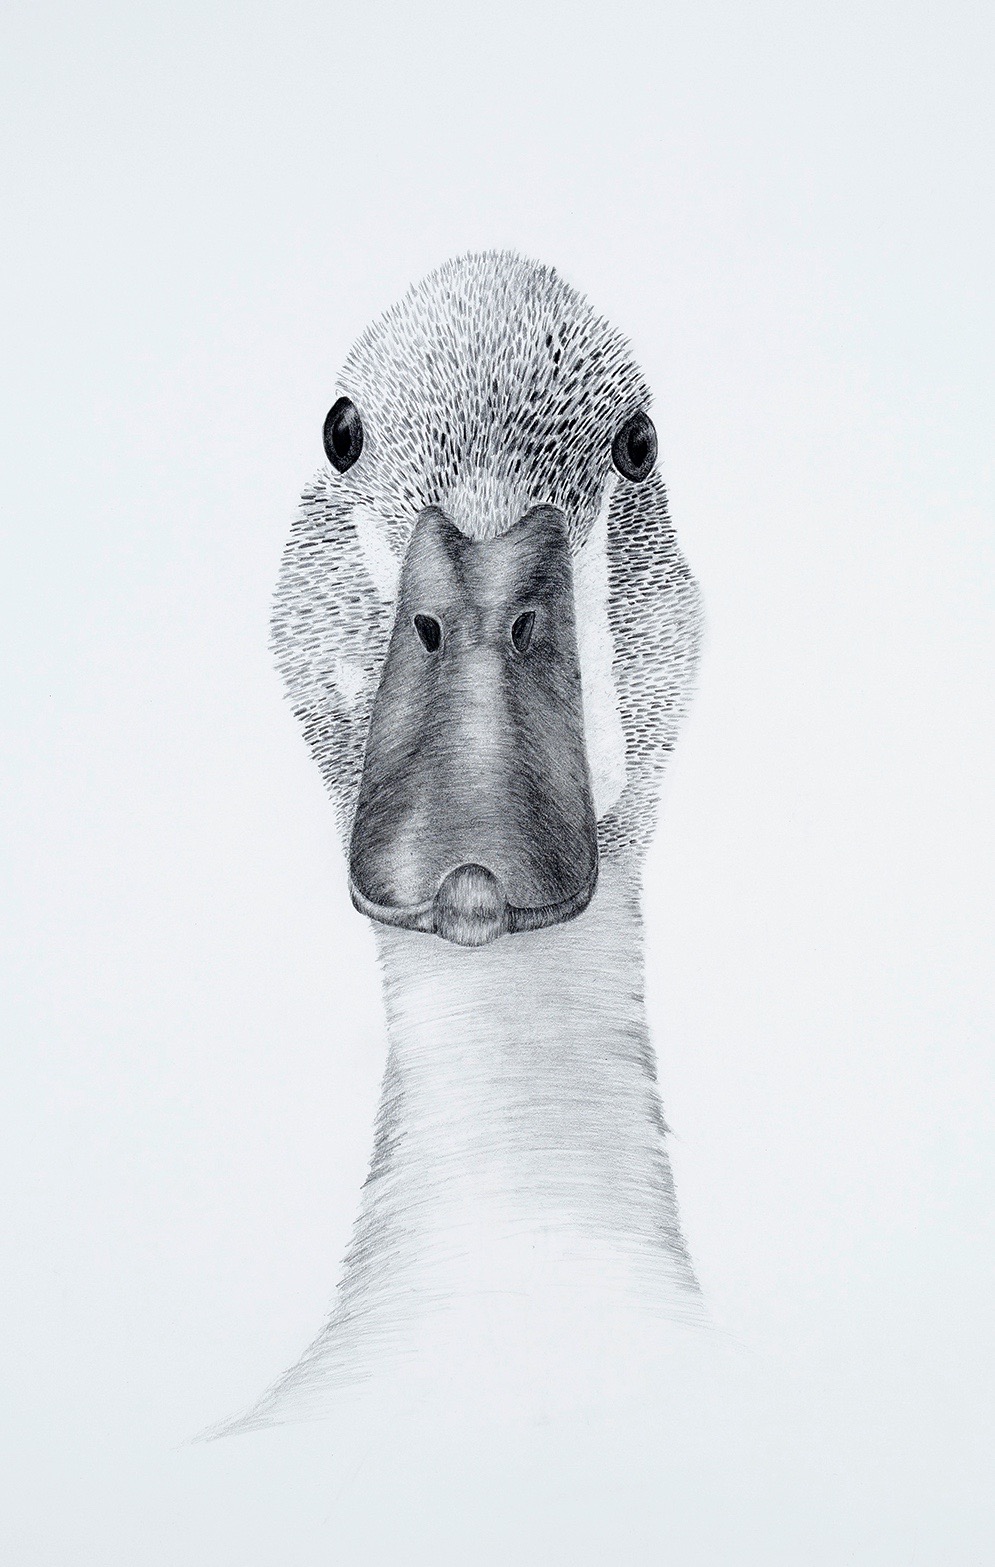   KEEPER OF MY SECRET: DUCK   Graphite, colored pencil  36" x 26.5" 